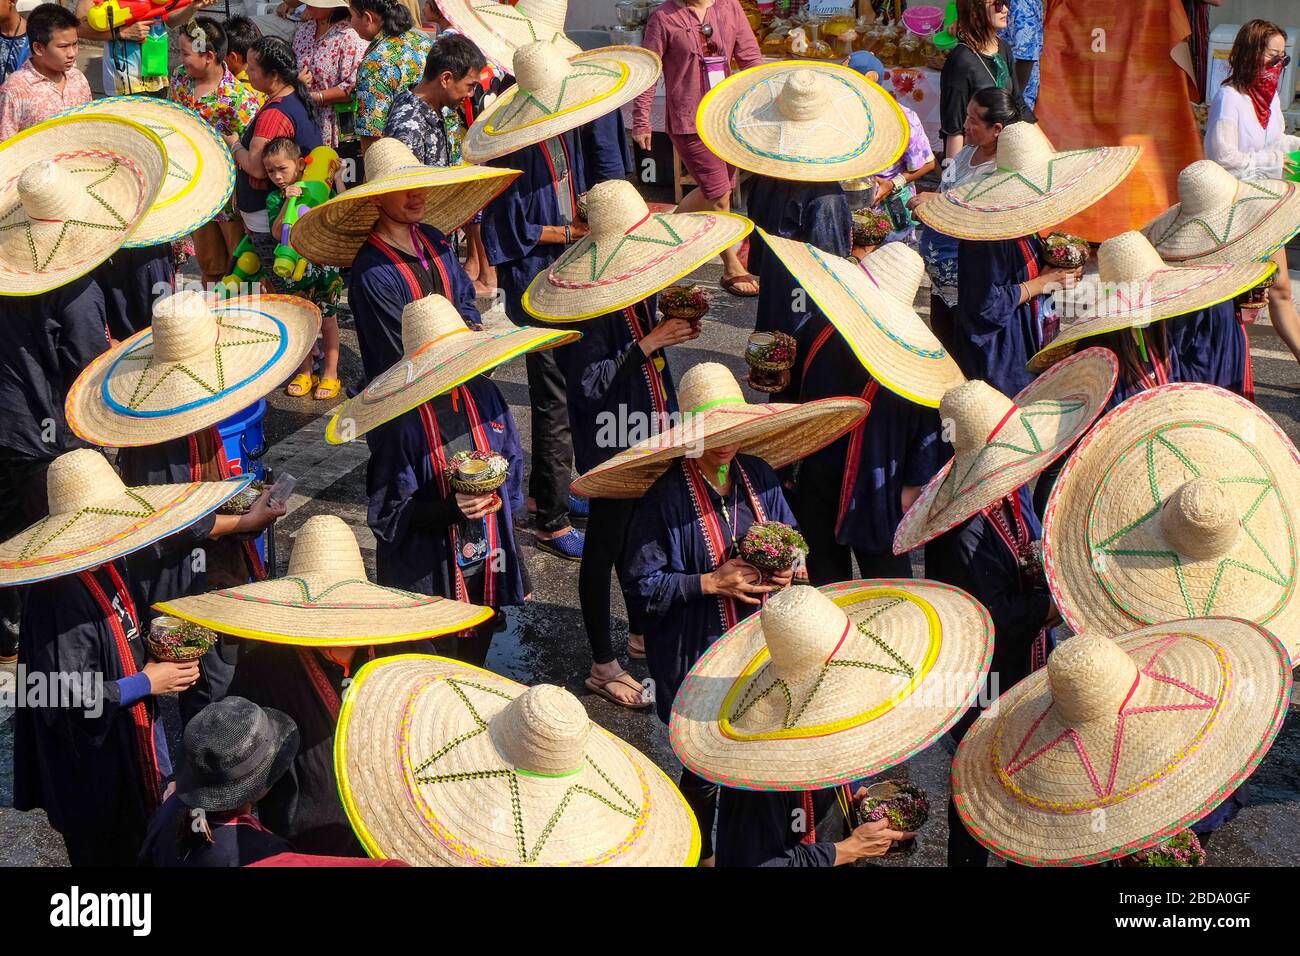 Chiang Mai, Thailand - April 13, 2018. Particiapnts in the parade wearing wide-brimmed hats. Stock Photo